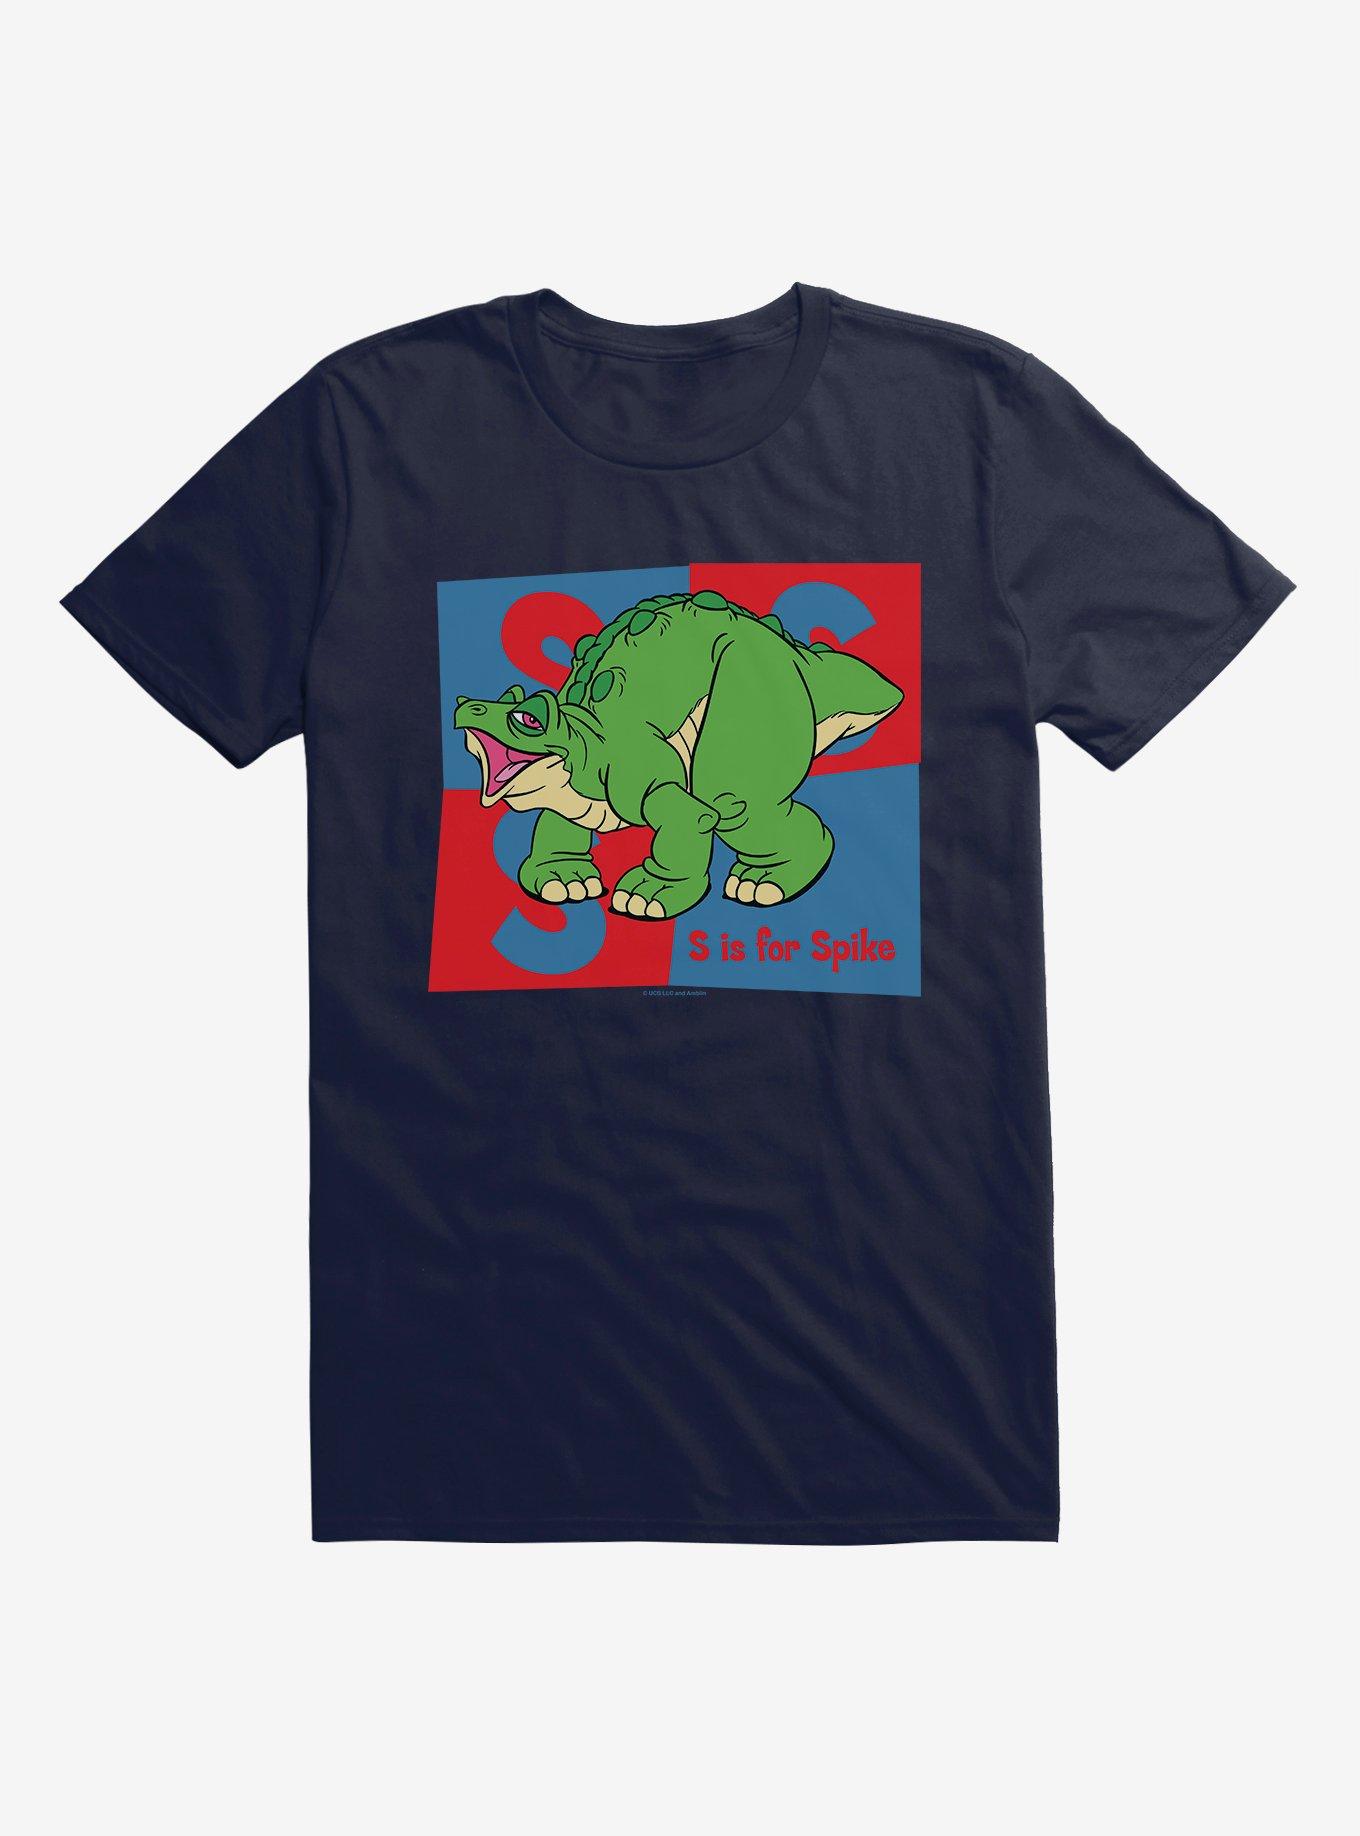 The Land Before Time S Is For Spike T-Shirt, NAVY, hi-res